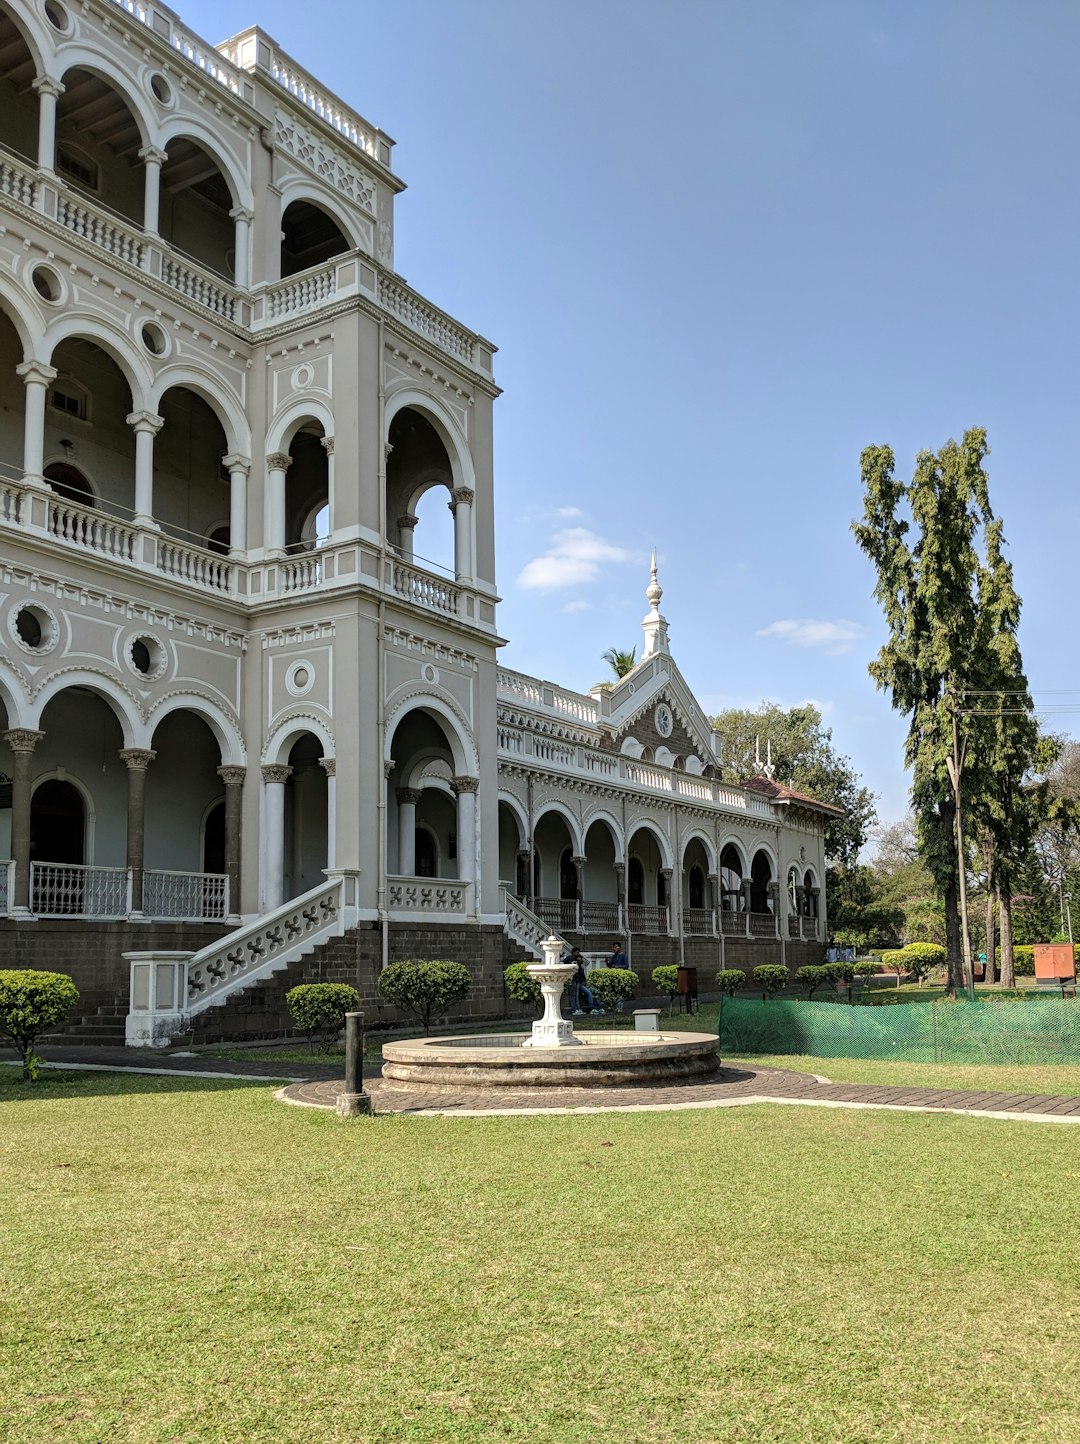 Travel Tips and Stories of Aga Khan Palace in India